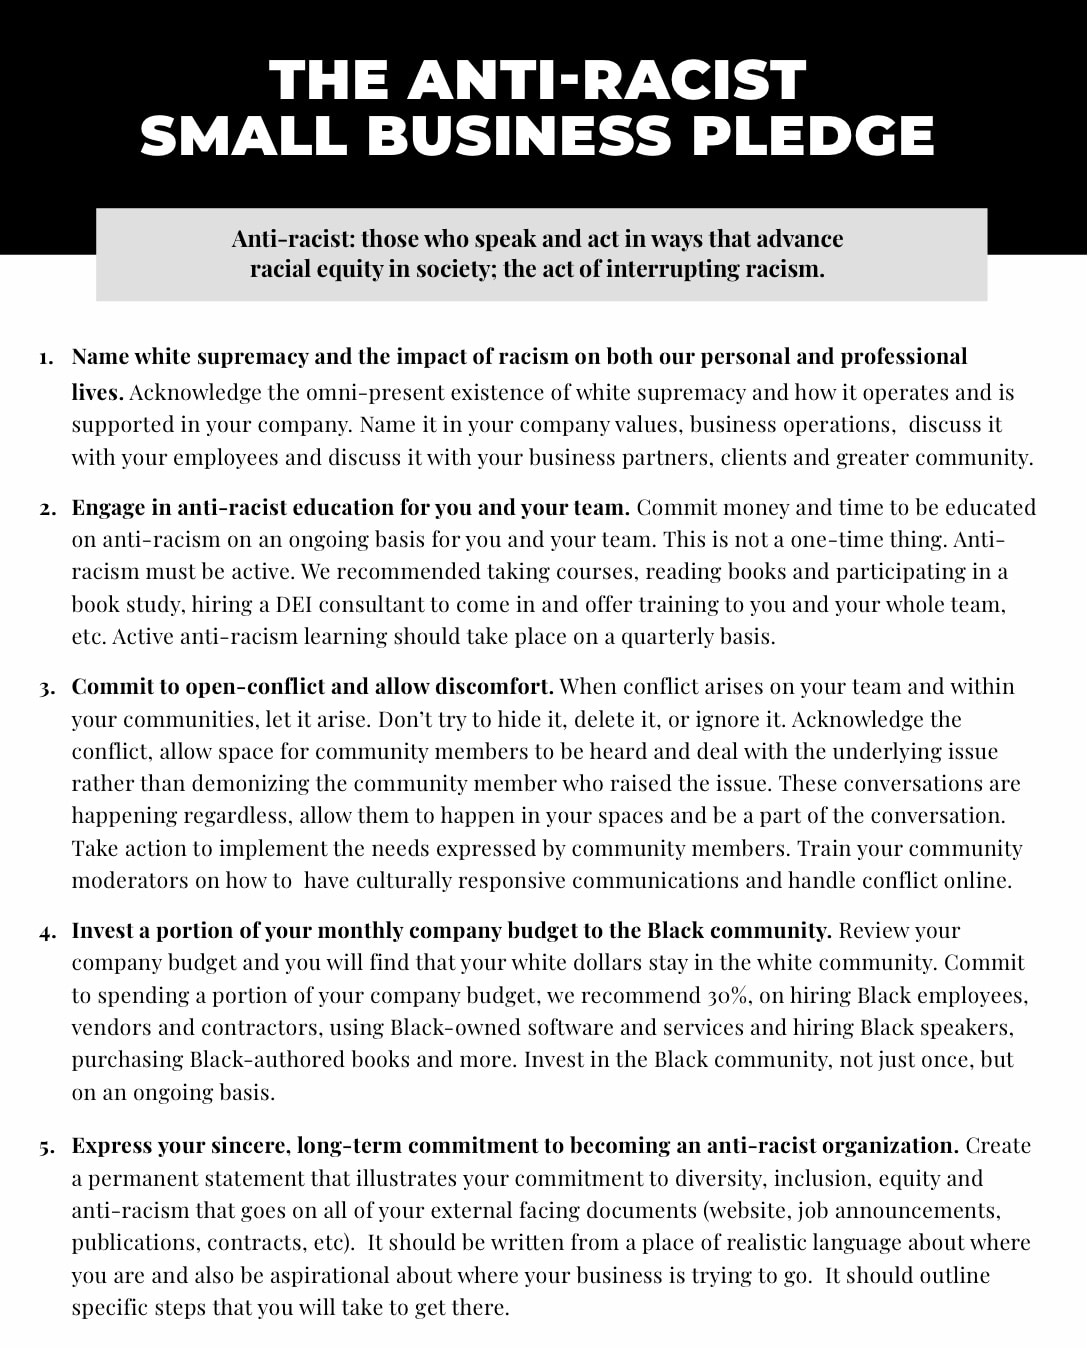 Will You Take The Anti-Racist Small Business Pledge?